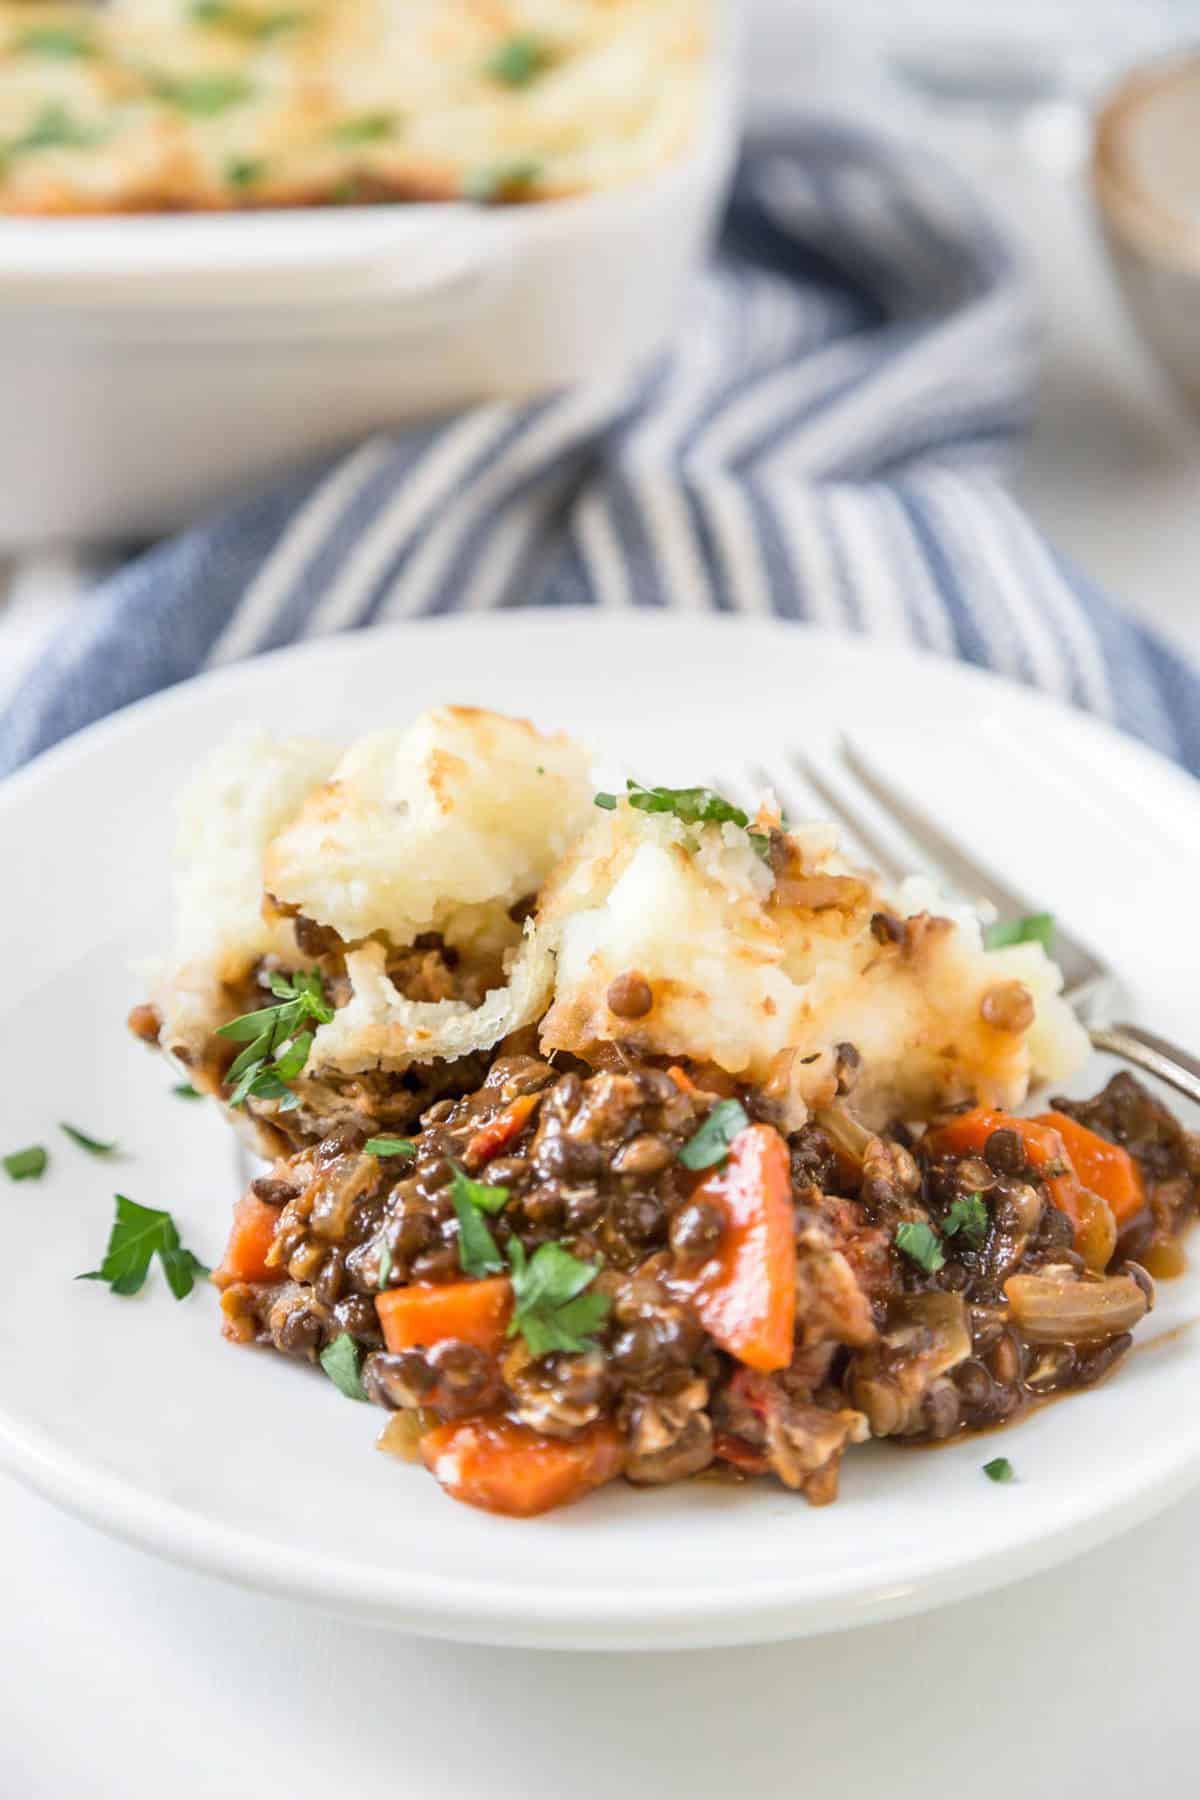 A serving of vegan shepherd's pie on a plate with a fork.